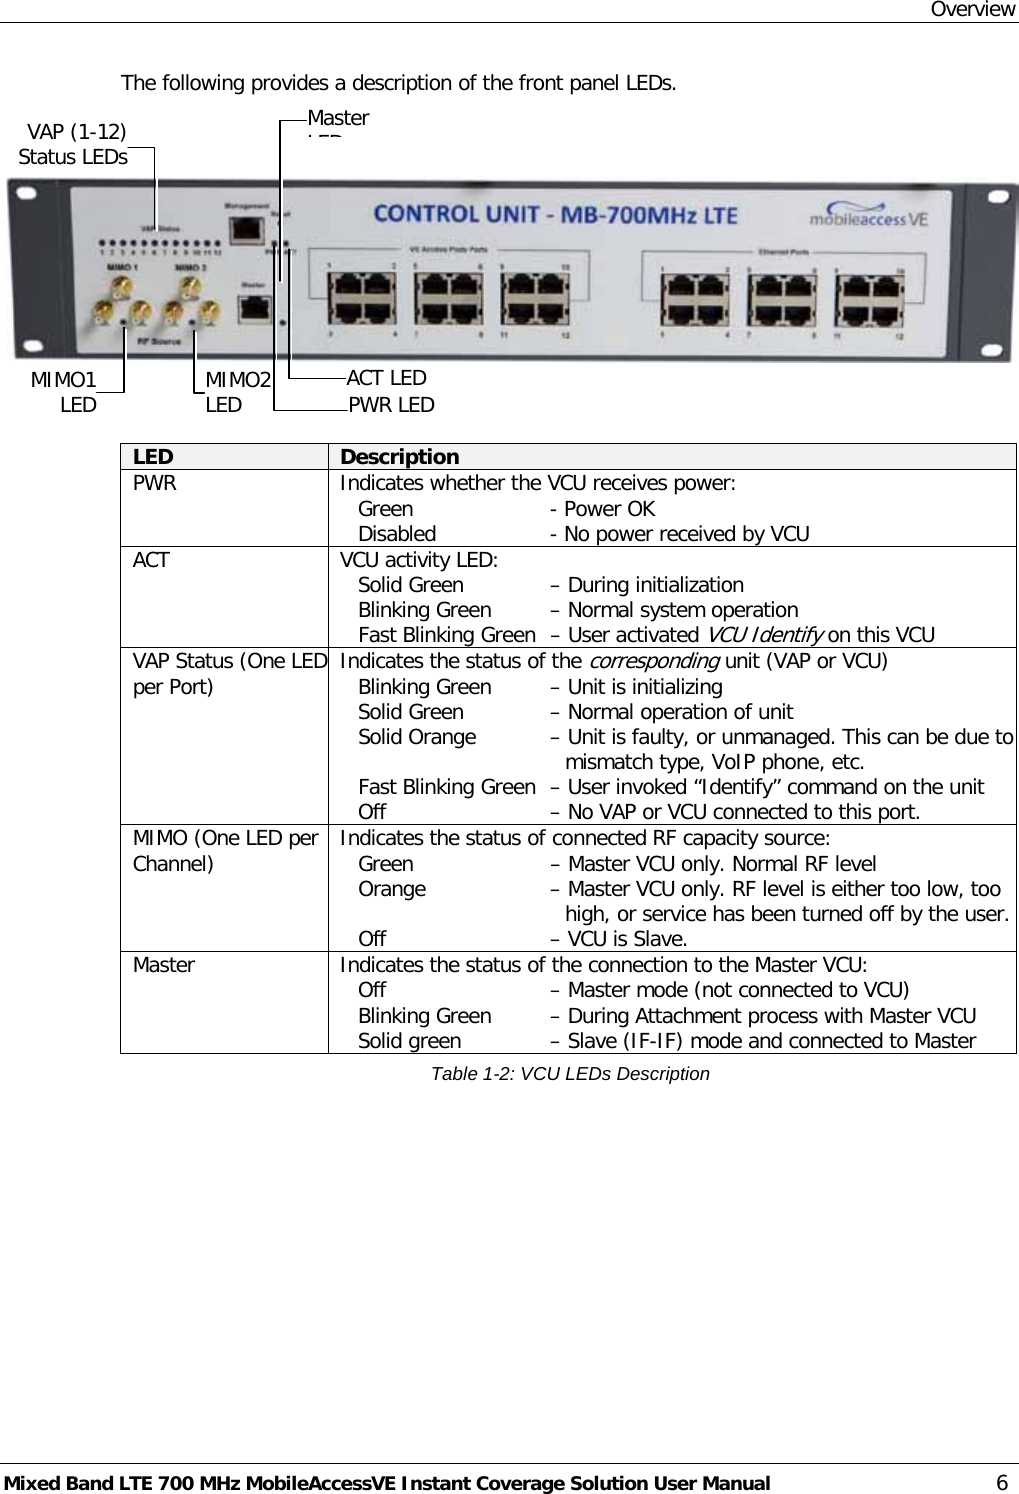 Overview Mixed Band LTE 700 MHz MobileAccessVE Instant Coverage Solution User Manual  6 The following provides a description of the front panel LEDs.      LED Description PWR Indicates whether the VCU receives power: Green   - Power OK  Disabled   - No power received by VCU ACT VCU activity LED: Solid Green   – During initialization  Blinking Green   – Normal system operation Fast Blinking Green  – User activated VCU Identify on this VCU VAP Status (One LED per Port)  Indicates the status of the corresponding unit (VAP or VCU) Blinking Green   – Unit is initializing Solid Green   – Normal operation of unit Solid Orange   – Unit is faulty, or unmanaged. This can be due to mismatch type, VoIP phone, etc. Fast Blinking Green  – User invoked “Identify” command on the unit Off   – No VAP or VCU connected to this port. MIMO (One LED per Channel)  Indicates the status of connected RF capacity source:  Green   – Master VCU only. Normal RF level  Orange     – Master VCU only. RF level is either too low, too high, or service has been turned off by the user.  Off   – VCU is Slave. Master  Indicates the status of the connection to the Master VCU:  Off   – Master mode (not connected to VCU) Blinking Green   – During Attachment process with Master VCU Solid green   – Slave (IF-IF) mode and connected to Master Table  1-2: VCU LEDs Description   PWR LED   ACT LED   VAP (1-12) Status LEDs    Master LED   MIMO1 LED   MIMO2 LED   